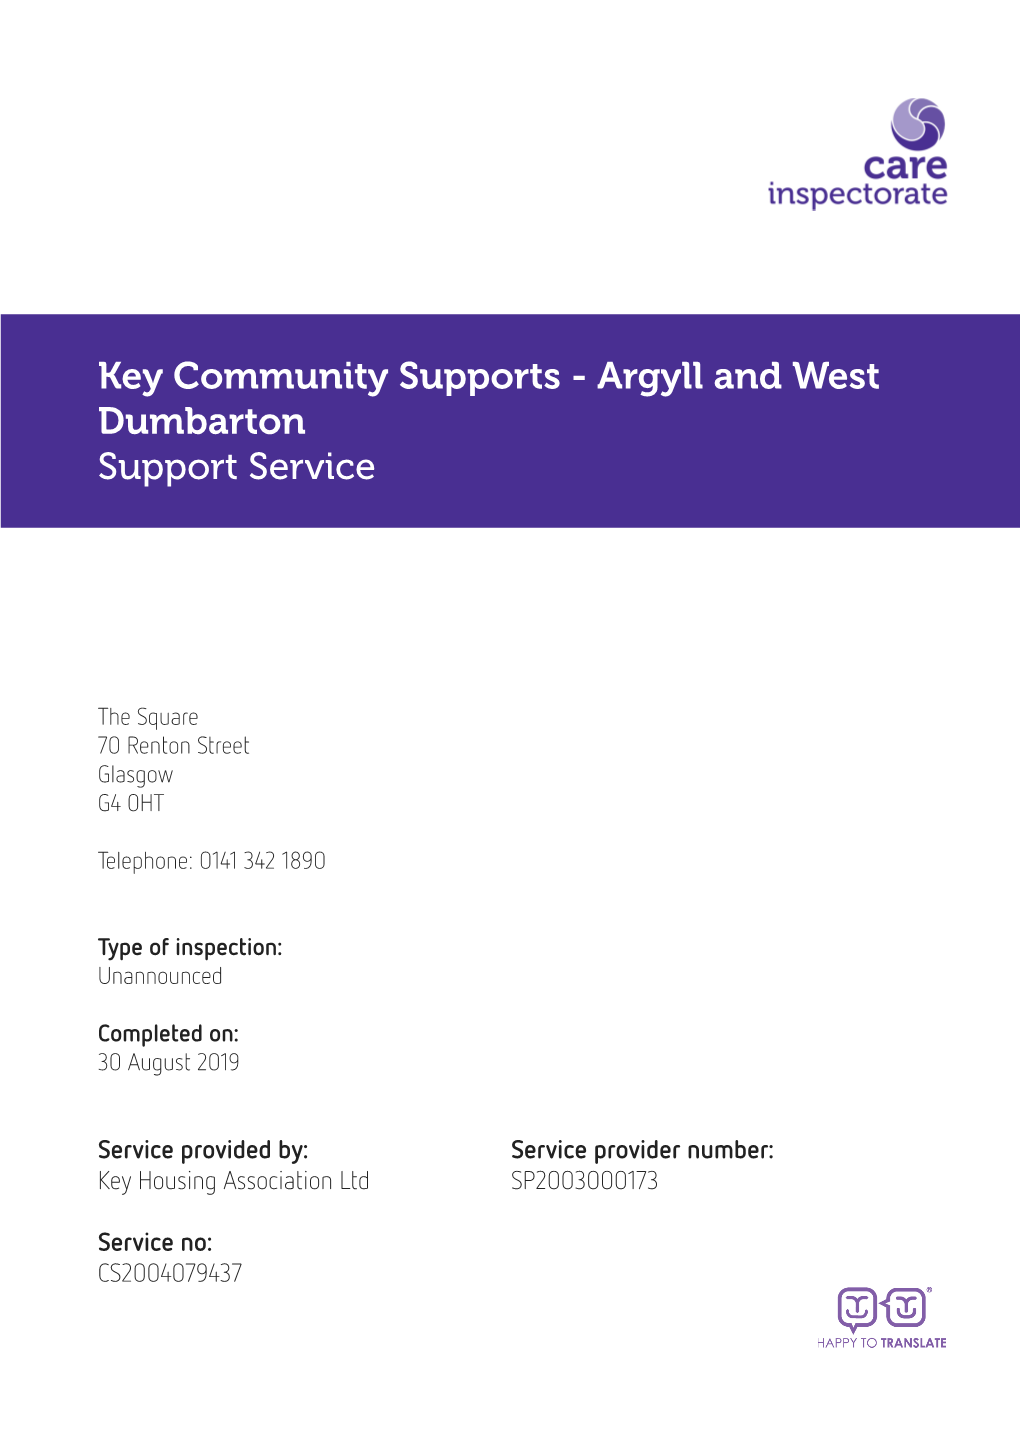 Key Community Supports - Argyll and West Dumbarton Support Service